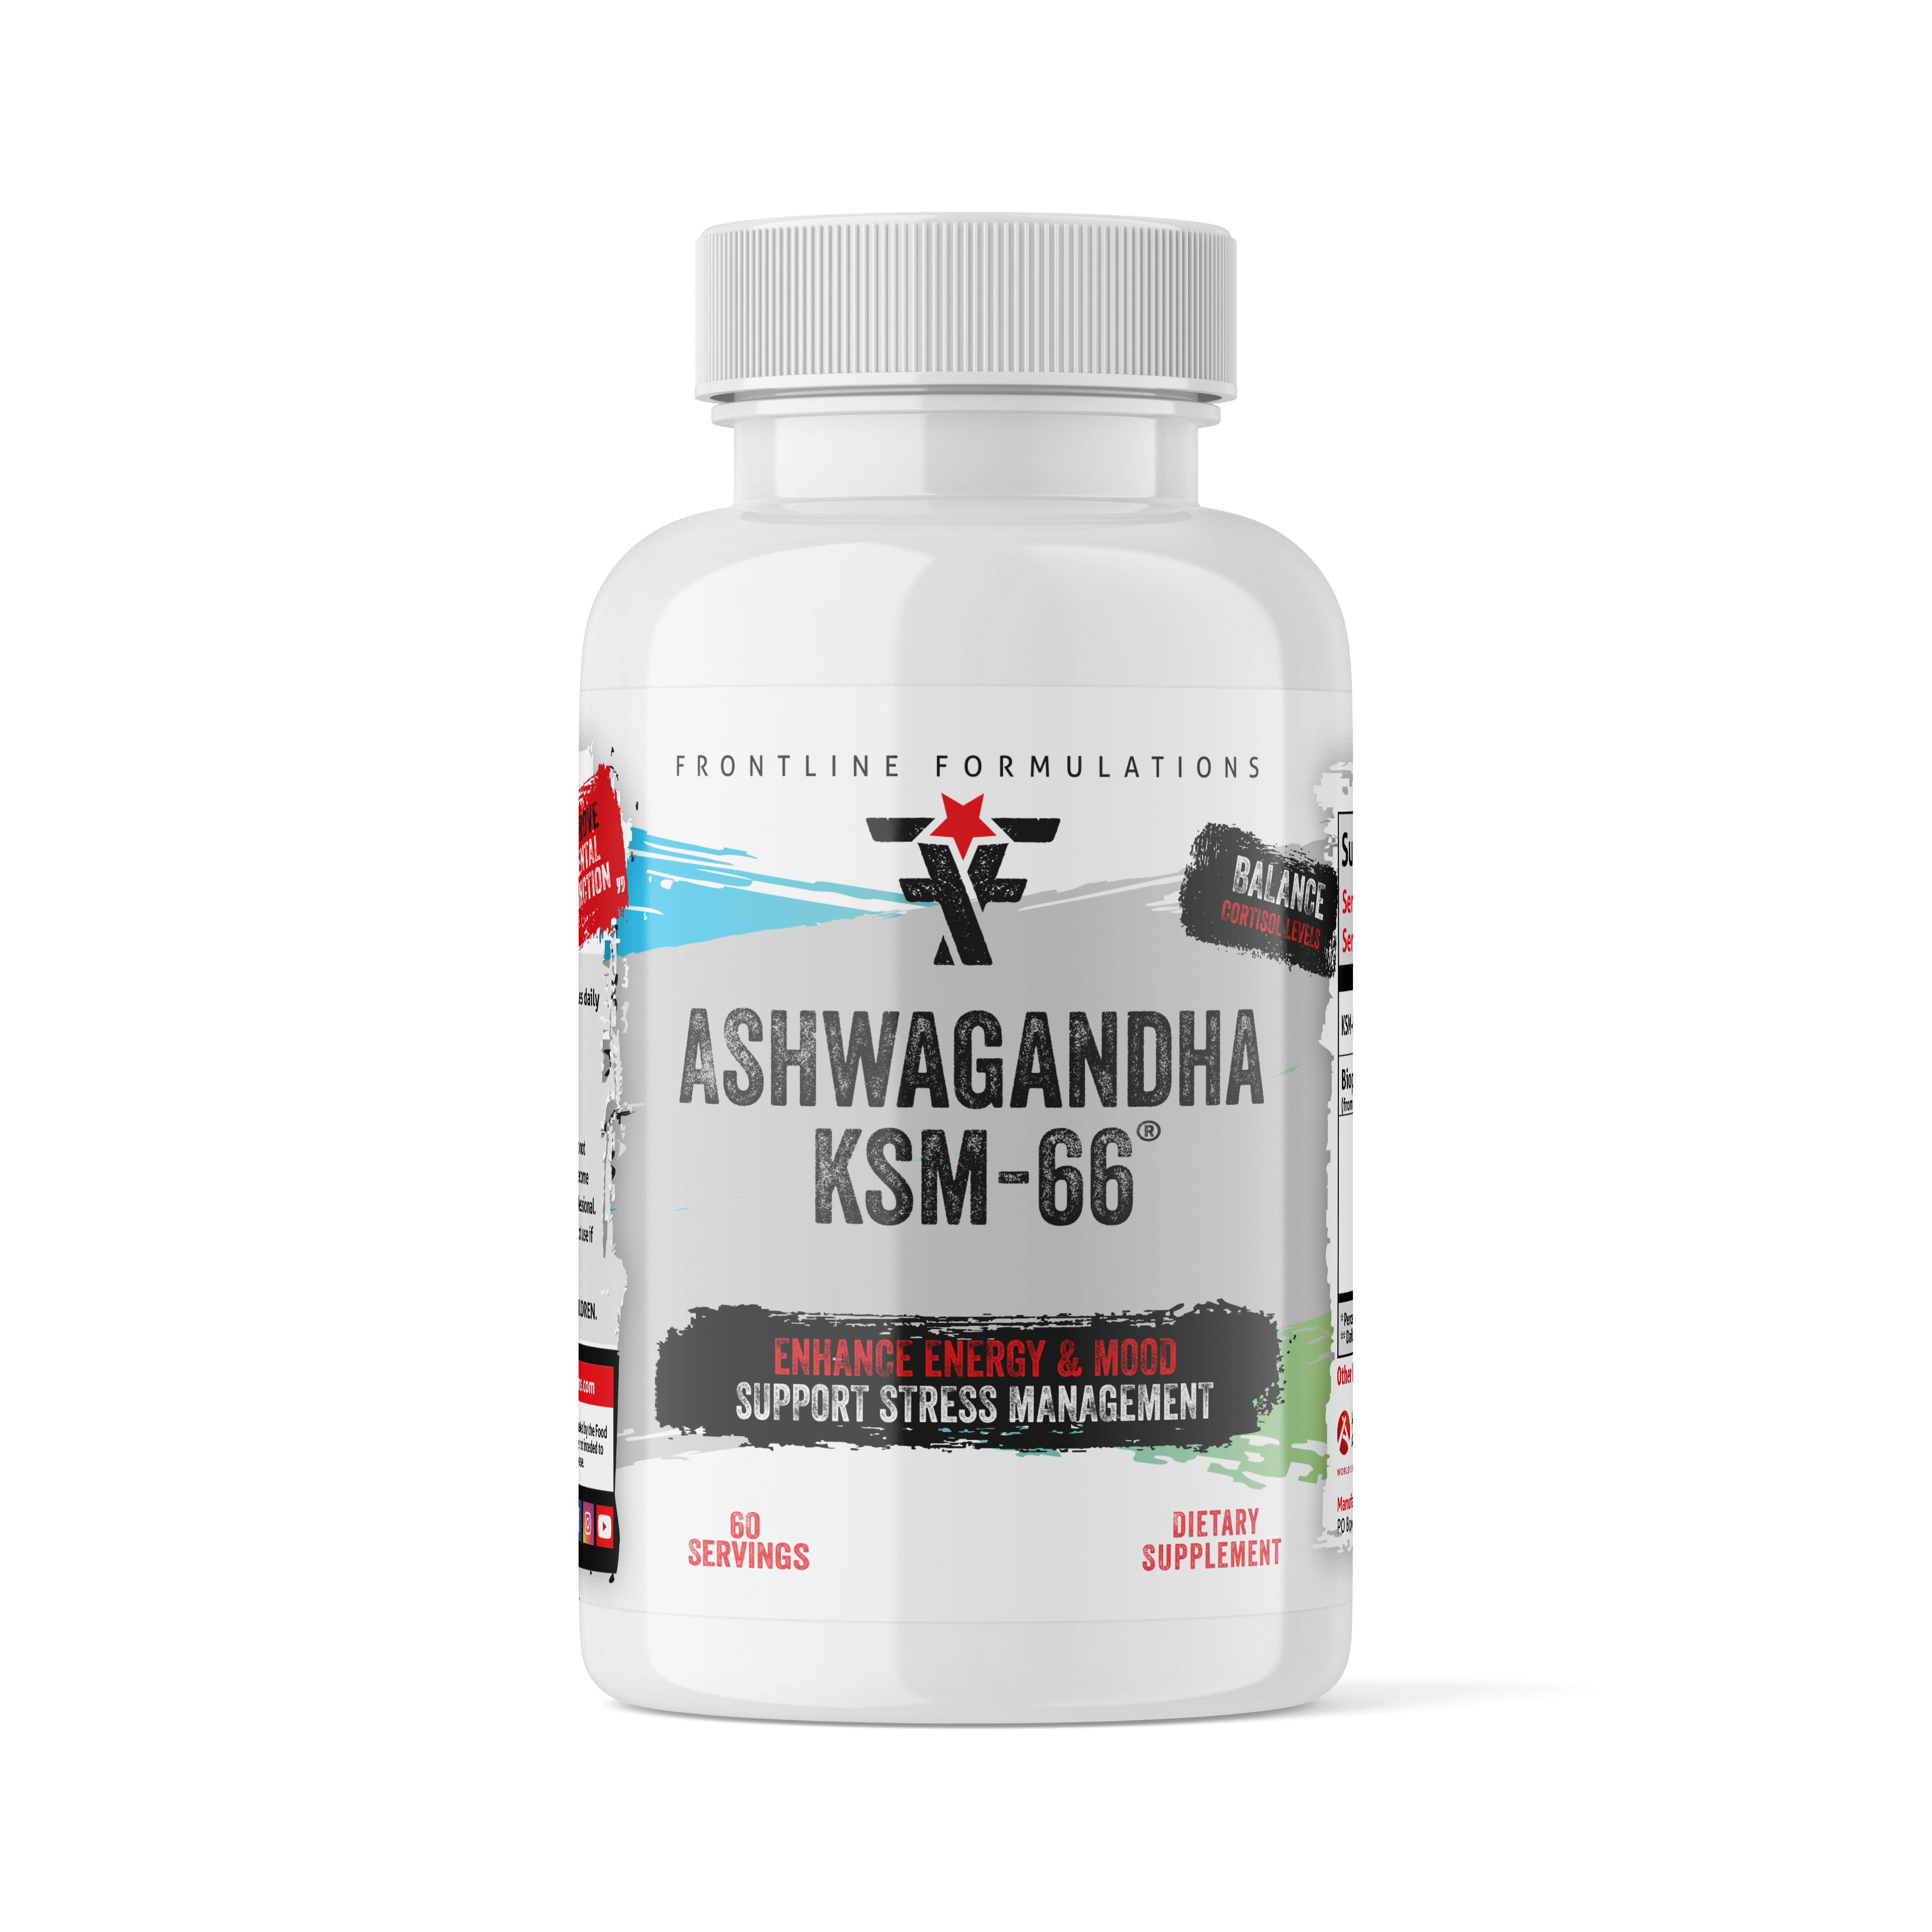 Ashwagandha Ashwagandha, scientifically known as Withania somnifera, is an ancient medicinal herb with numerous health benefits. It has been used in traditional Ayurvedic medicine for centuries due to its adaptogenic properties. Here are some of the poten